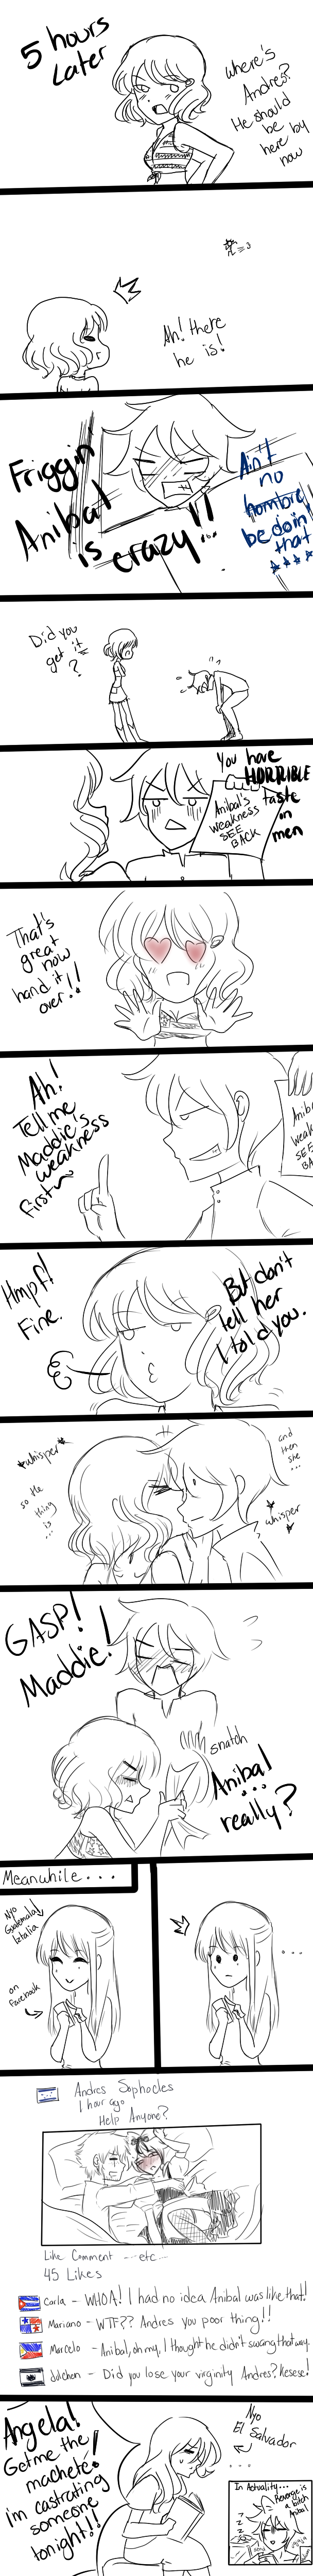 APH+LH: The Nyo Love Conundrum Pt 4